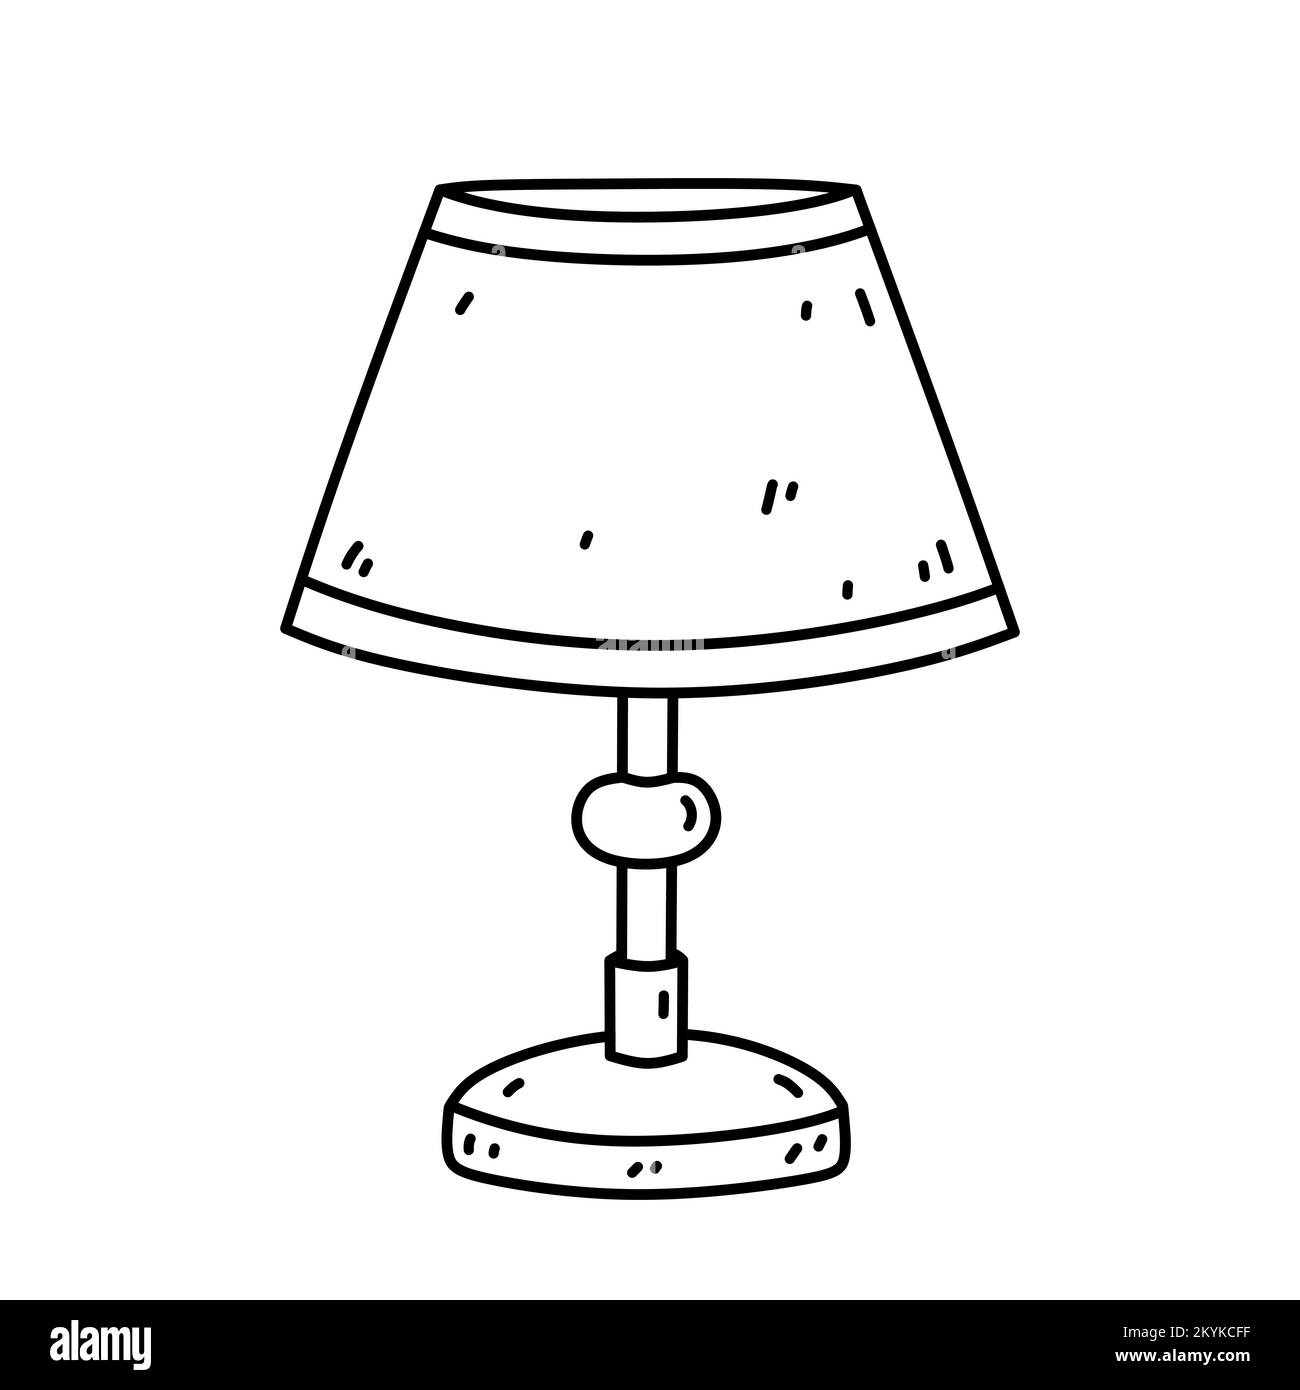 Shabby Chic Lamp Hand Drawn Picture Stock Vector Royalty Free 746177179   Shutterstock